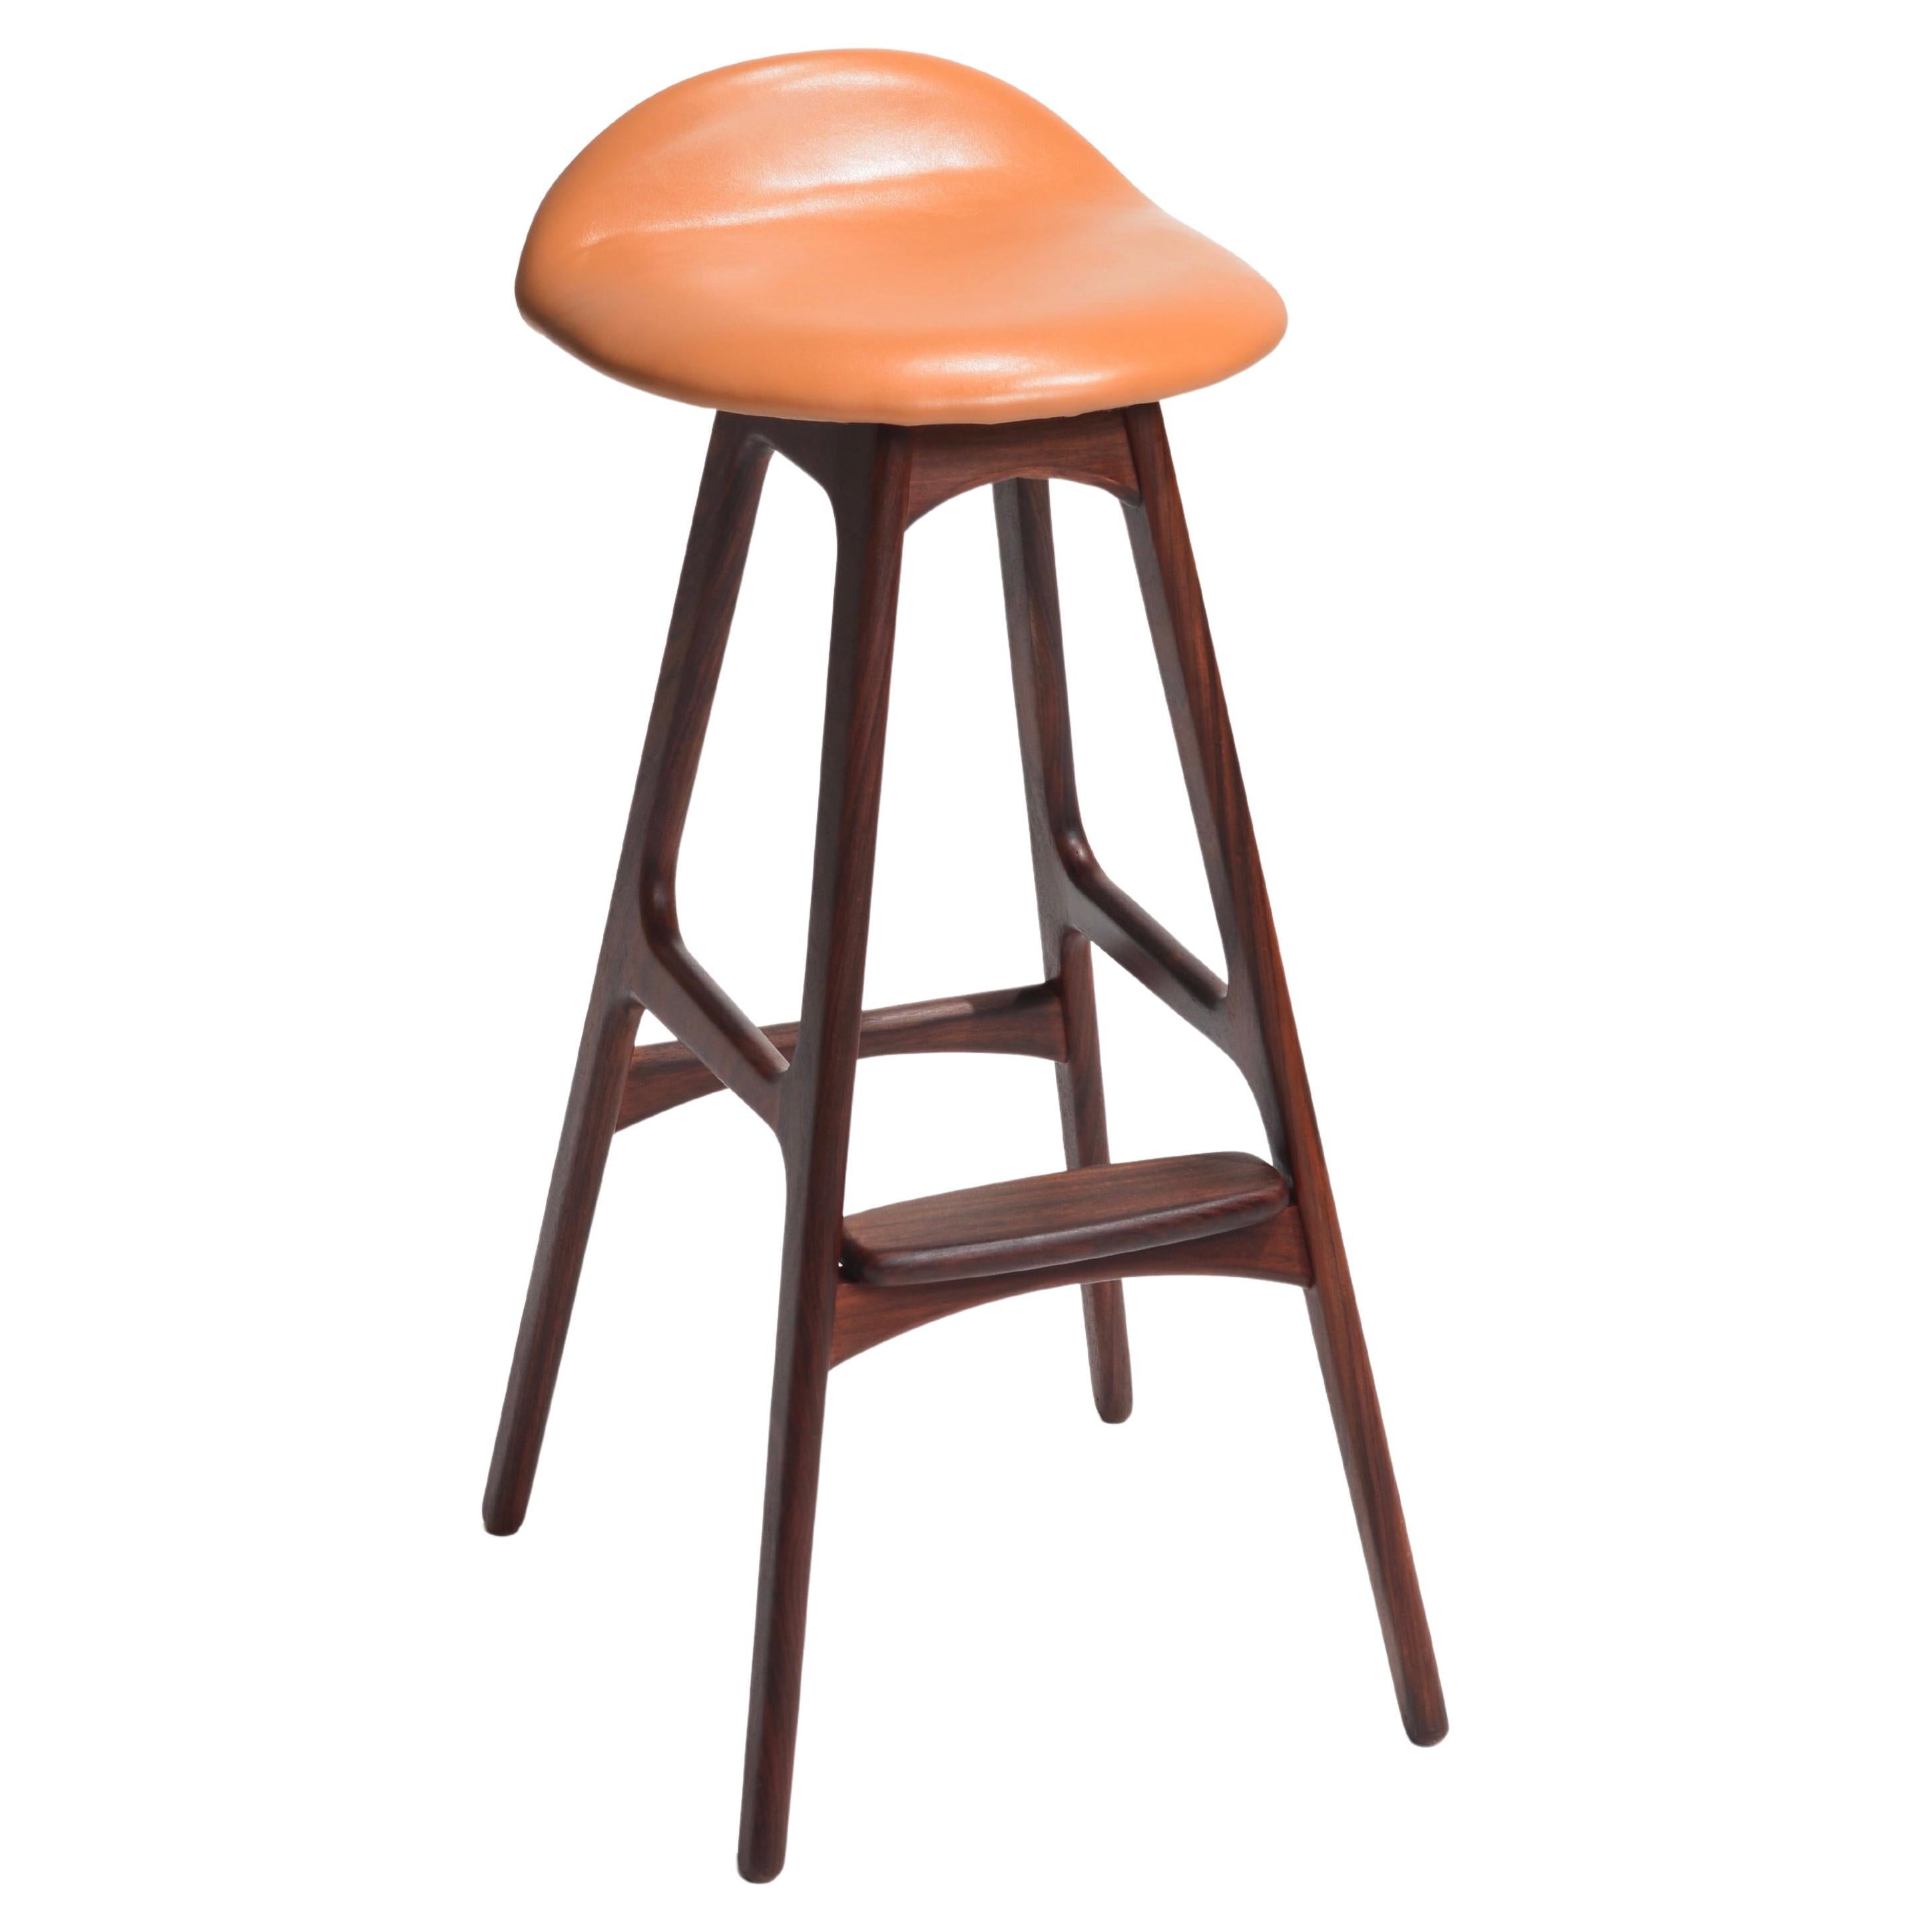 The Erik Buch Bar Stools Model OD-61, crafted by the renowned Danish furniture manufacturer Oddense Møbelfabrik, are a striking embodiment of Scandinavian design excellence. These iconic bar stools are a testament to the timeless appeal of